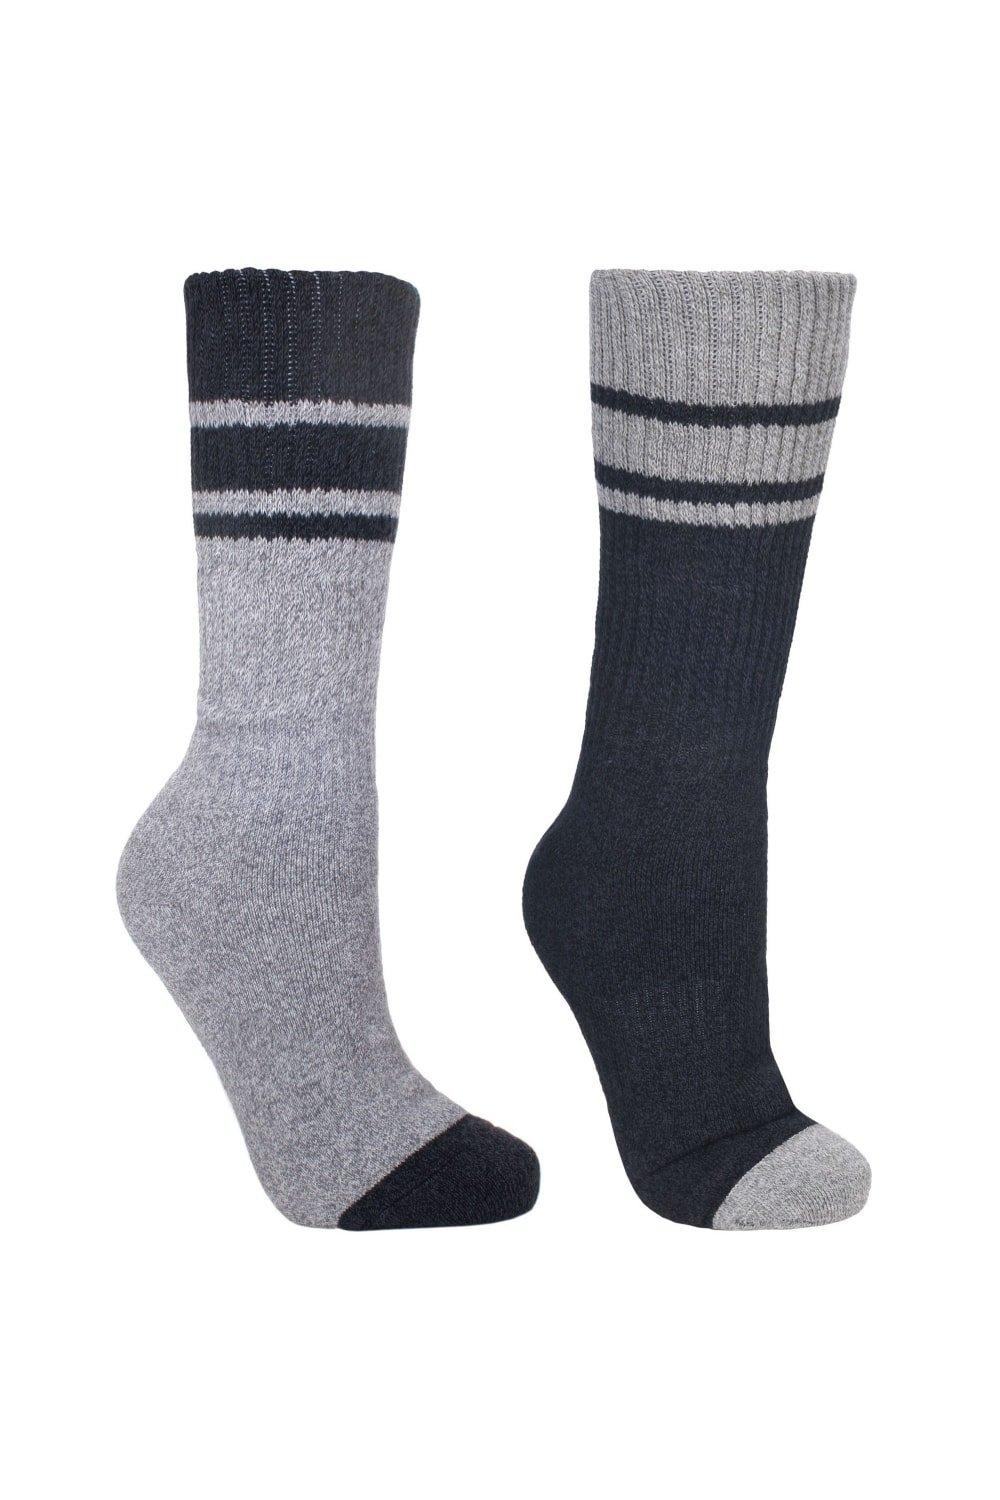 Hitched Two Tone Anti Blister Hiking Boot Socks (2 Pairs)